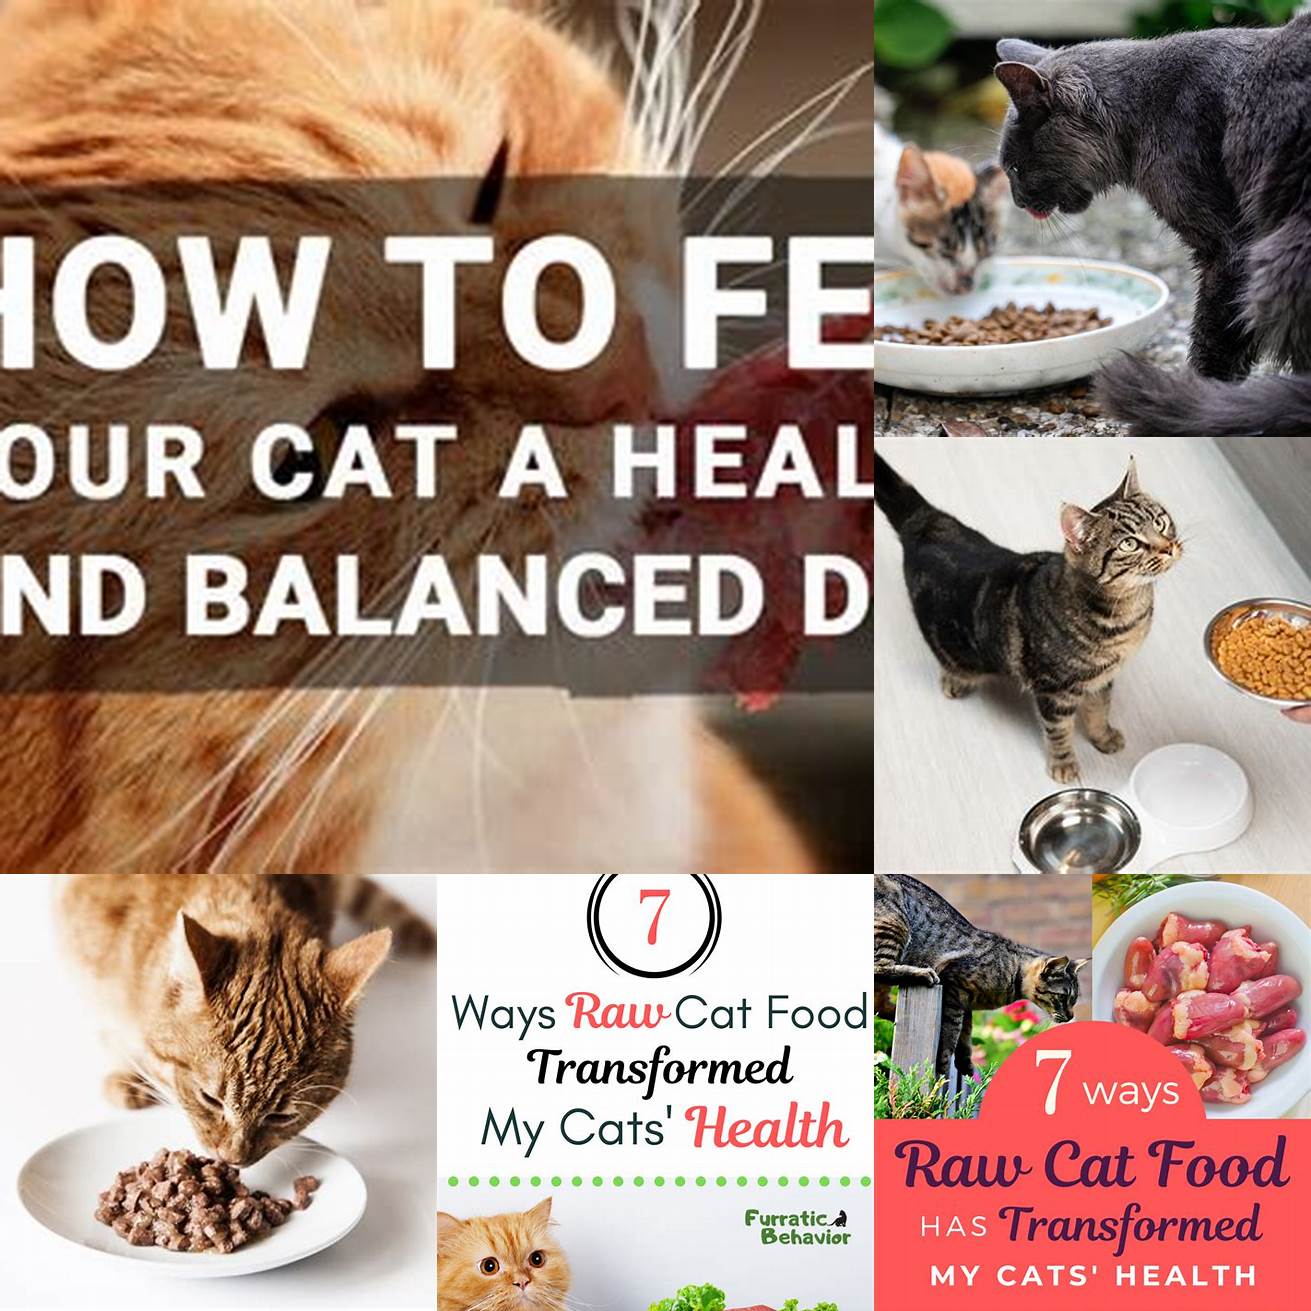 Feed your cat a balanced and nutritious diet